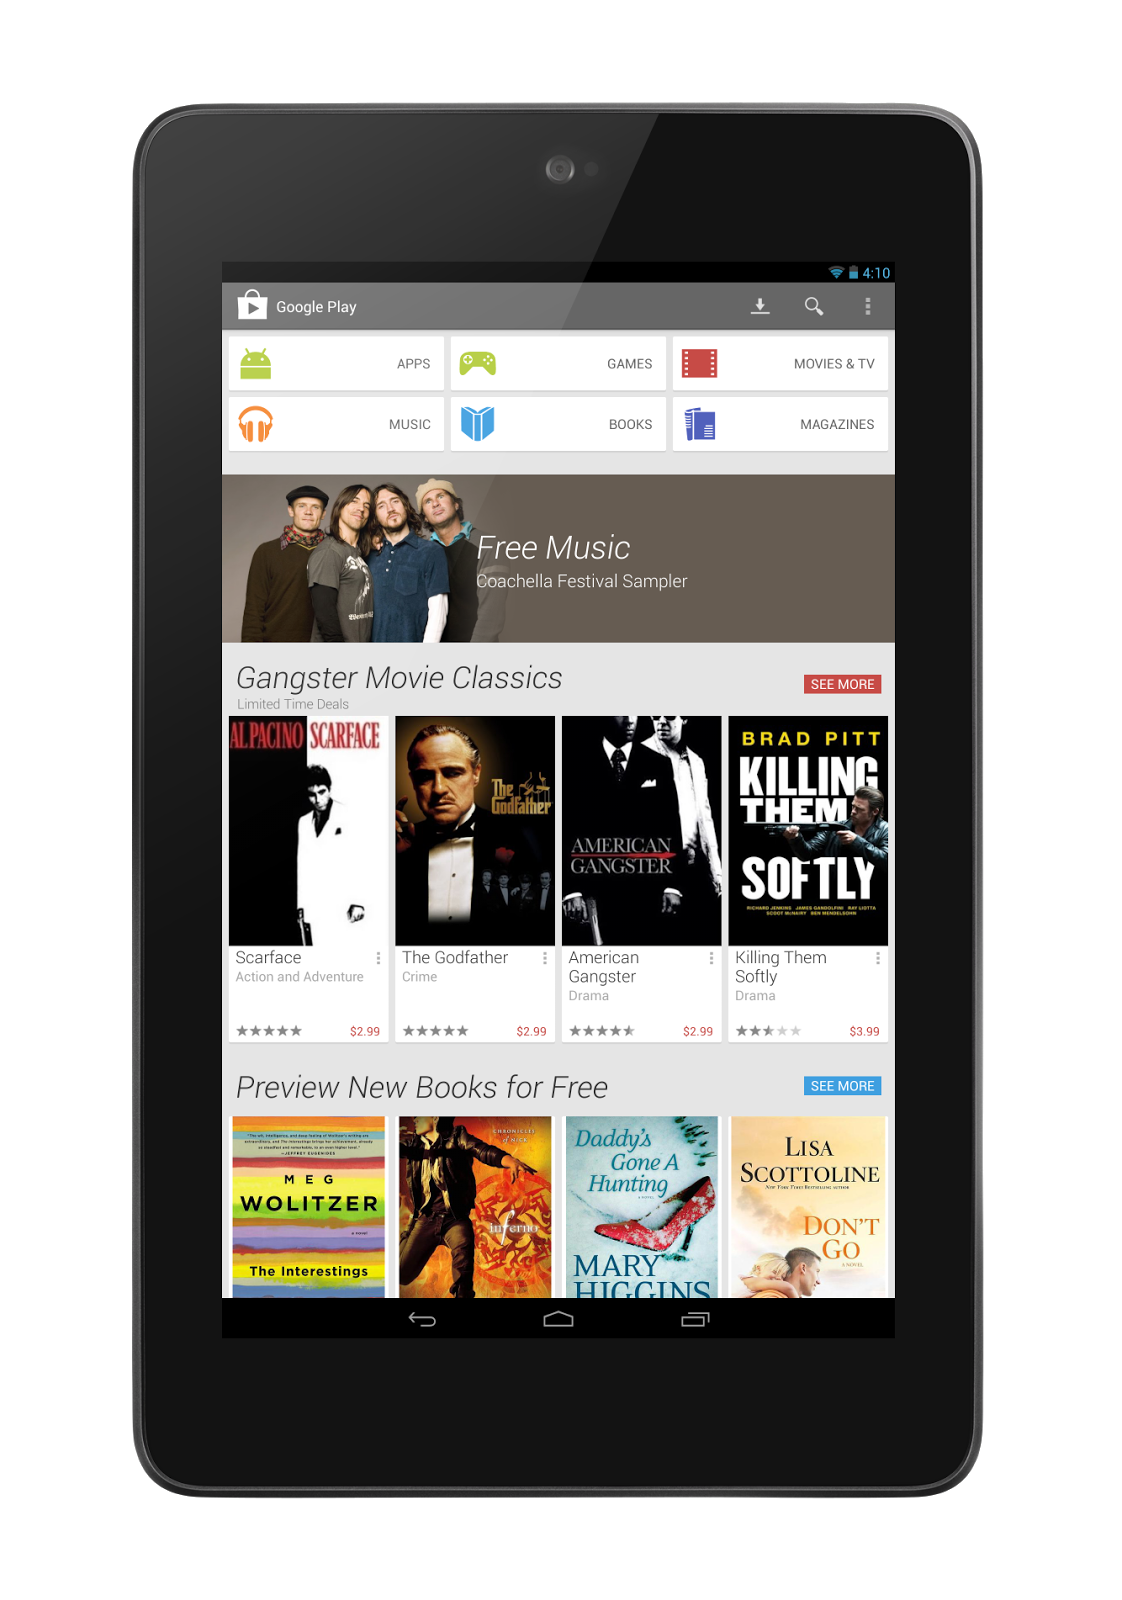 Google rolls out new media focused design for Google Play store